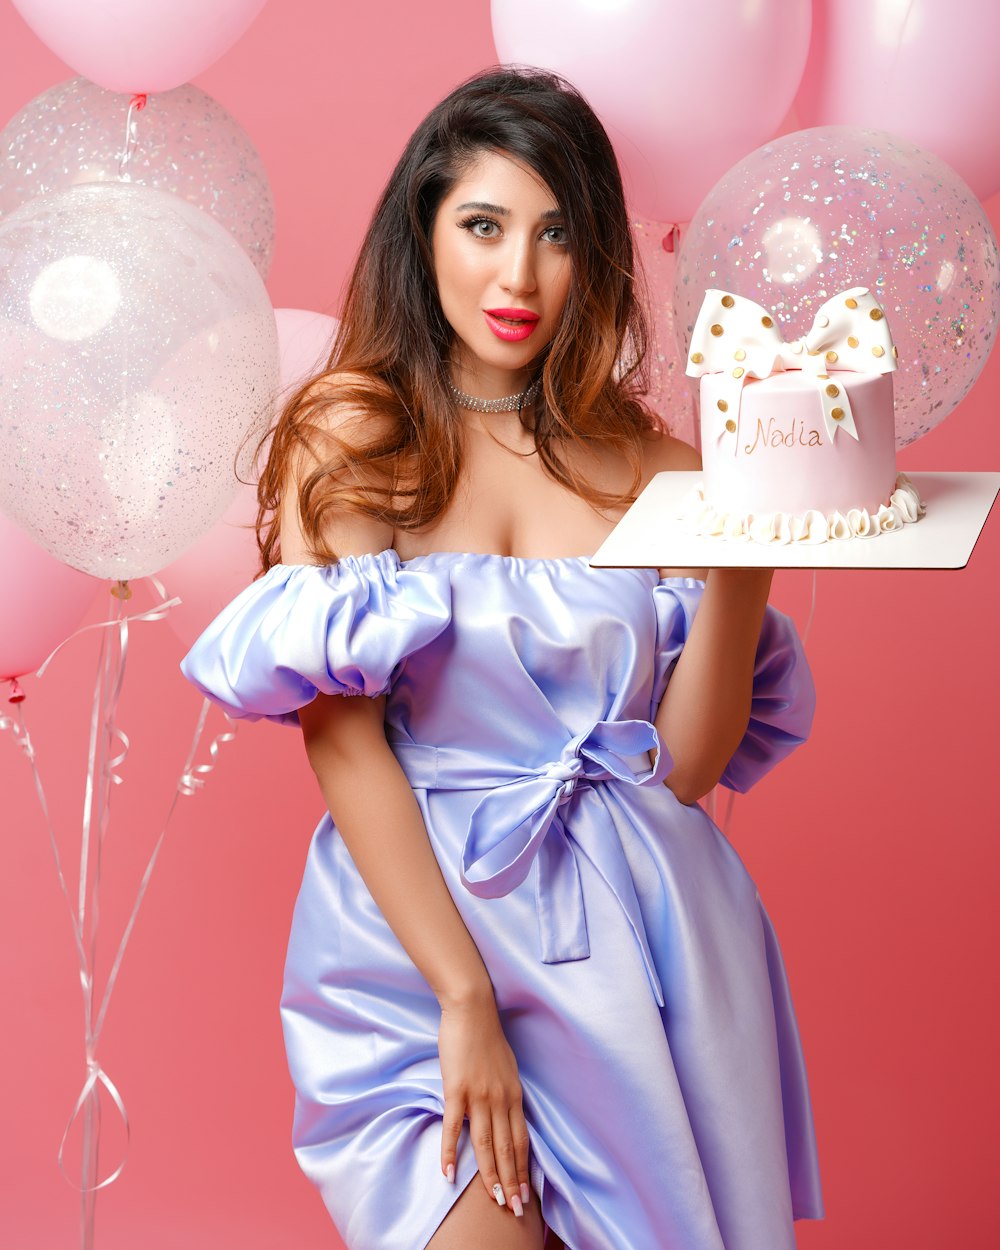 woman in blue dress holding happy birthday cake